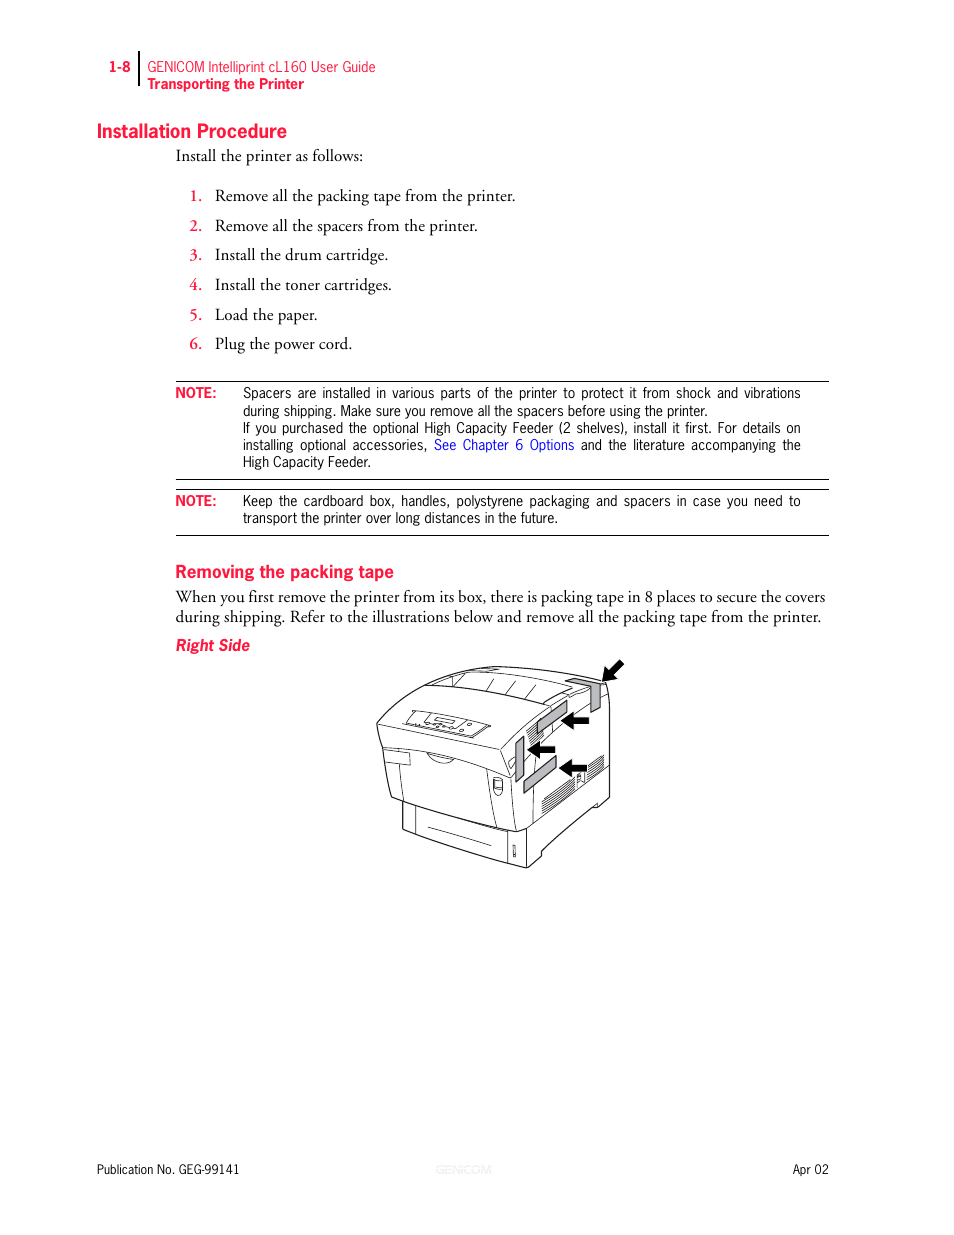 Installation procedure, Removing the packing tape 1-8 | Genicom cL160 User Manual | Page 28 / 216